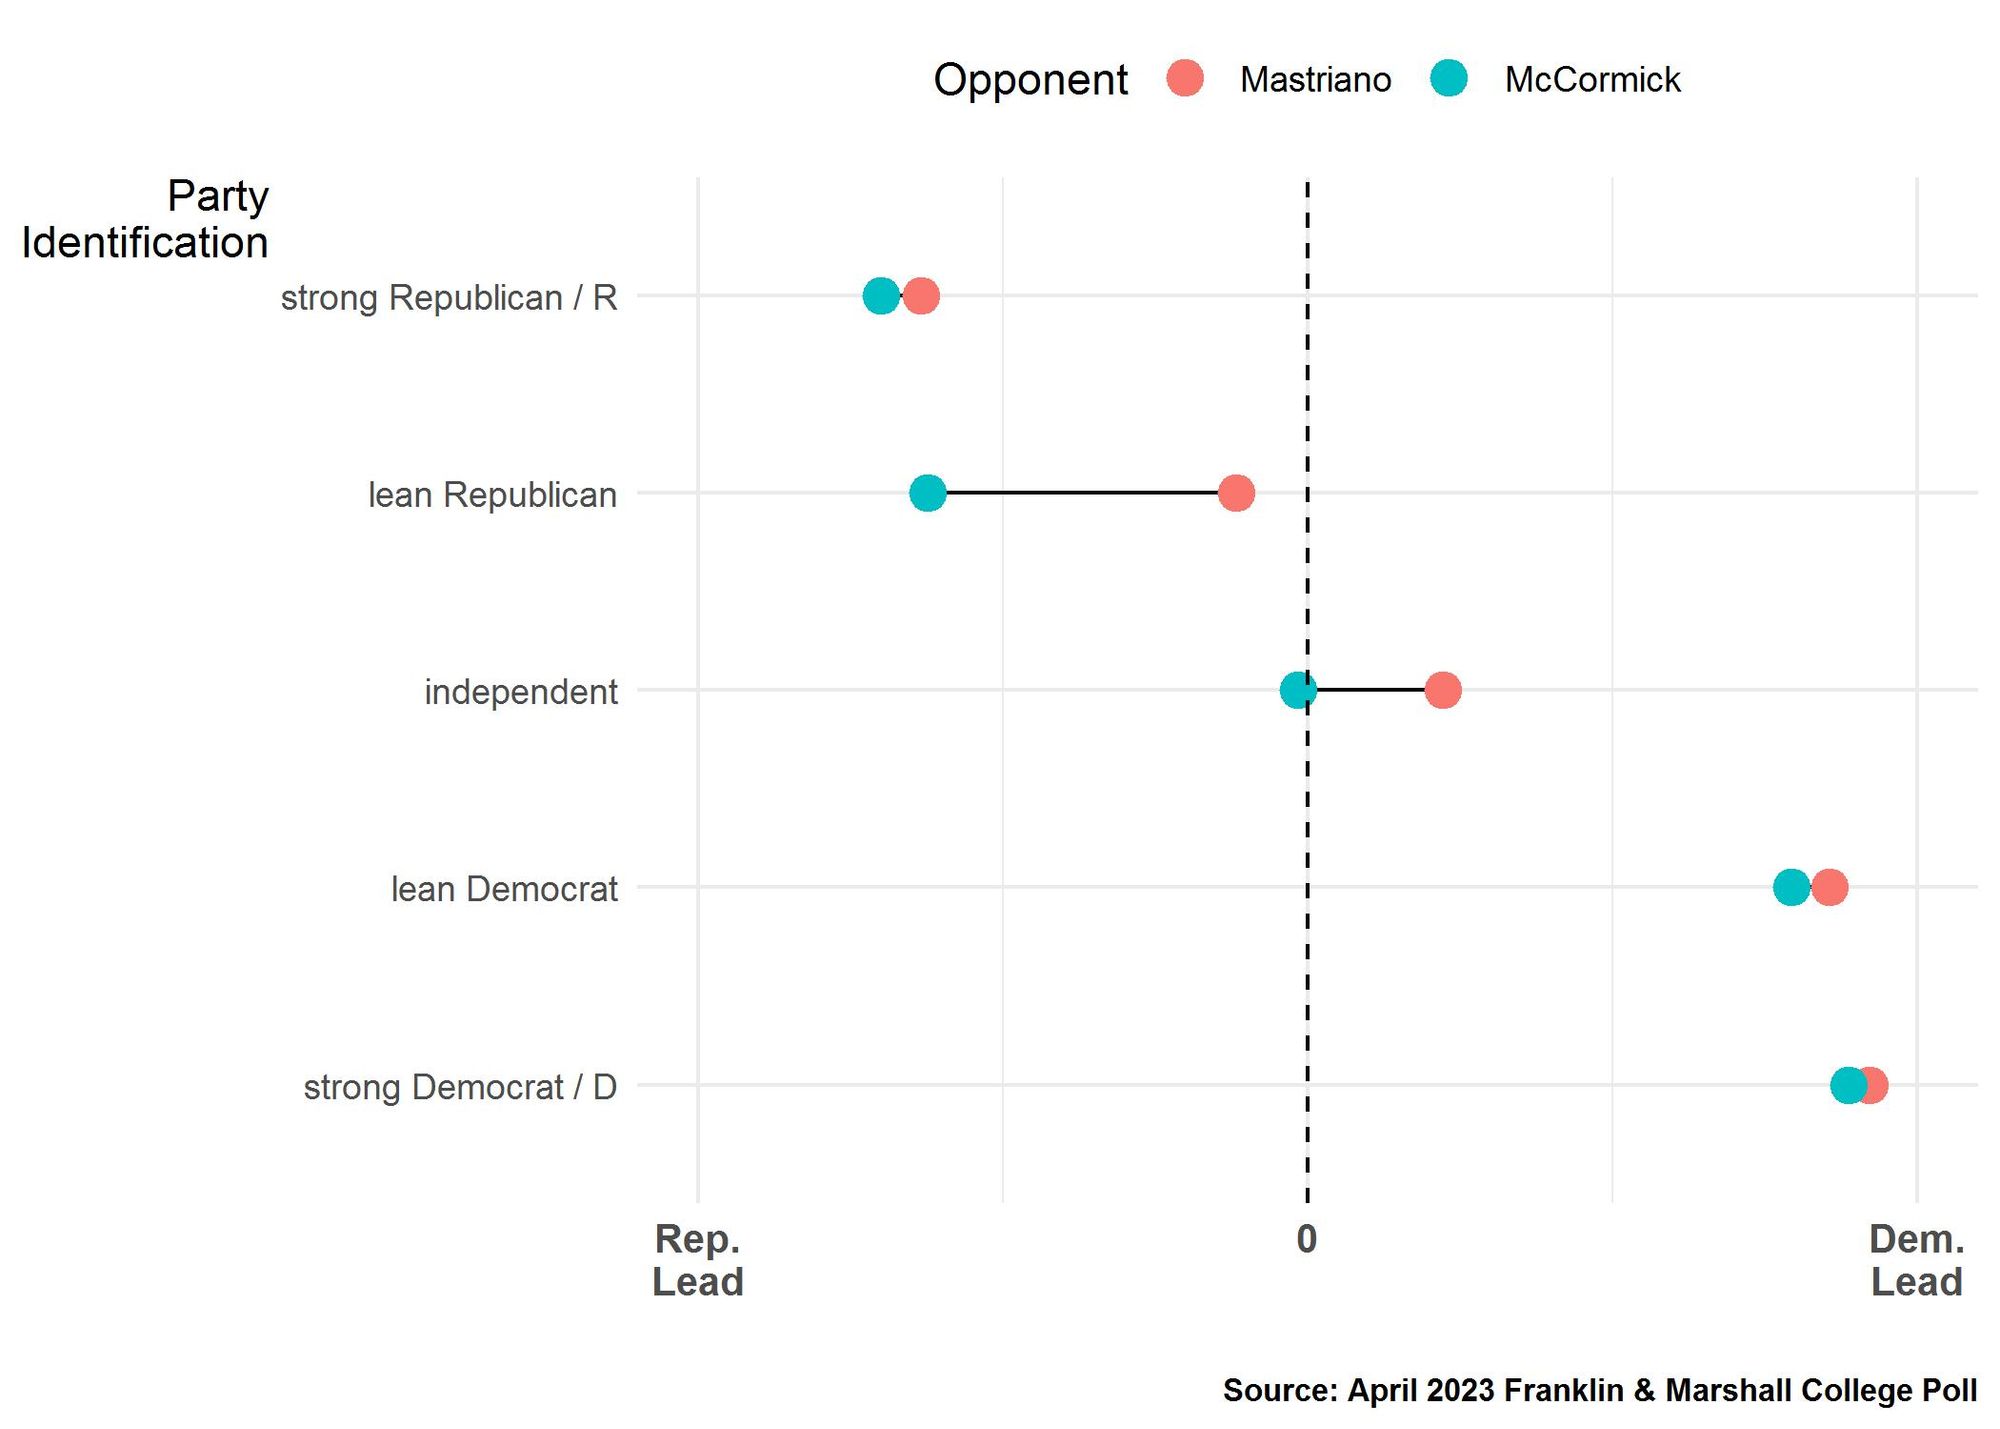 This figure shows each party’s perceived alignment with majority opinion on seven different issues according to party self-identification. Each line represents a different policy issue and the value reported for each issue represents the proportion who reported Democrats minus the proportion who reported Republicans as being aligned with majority opinion.